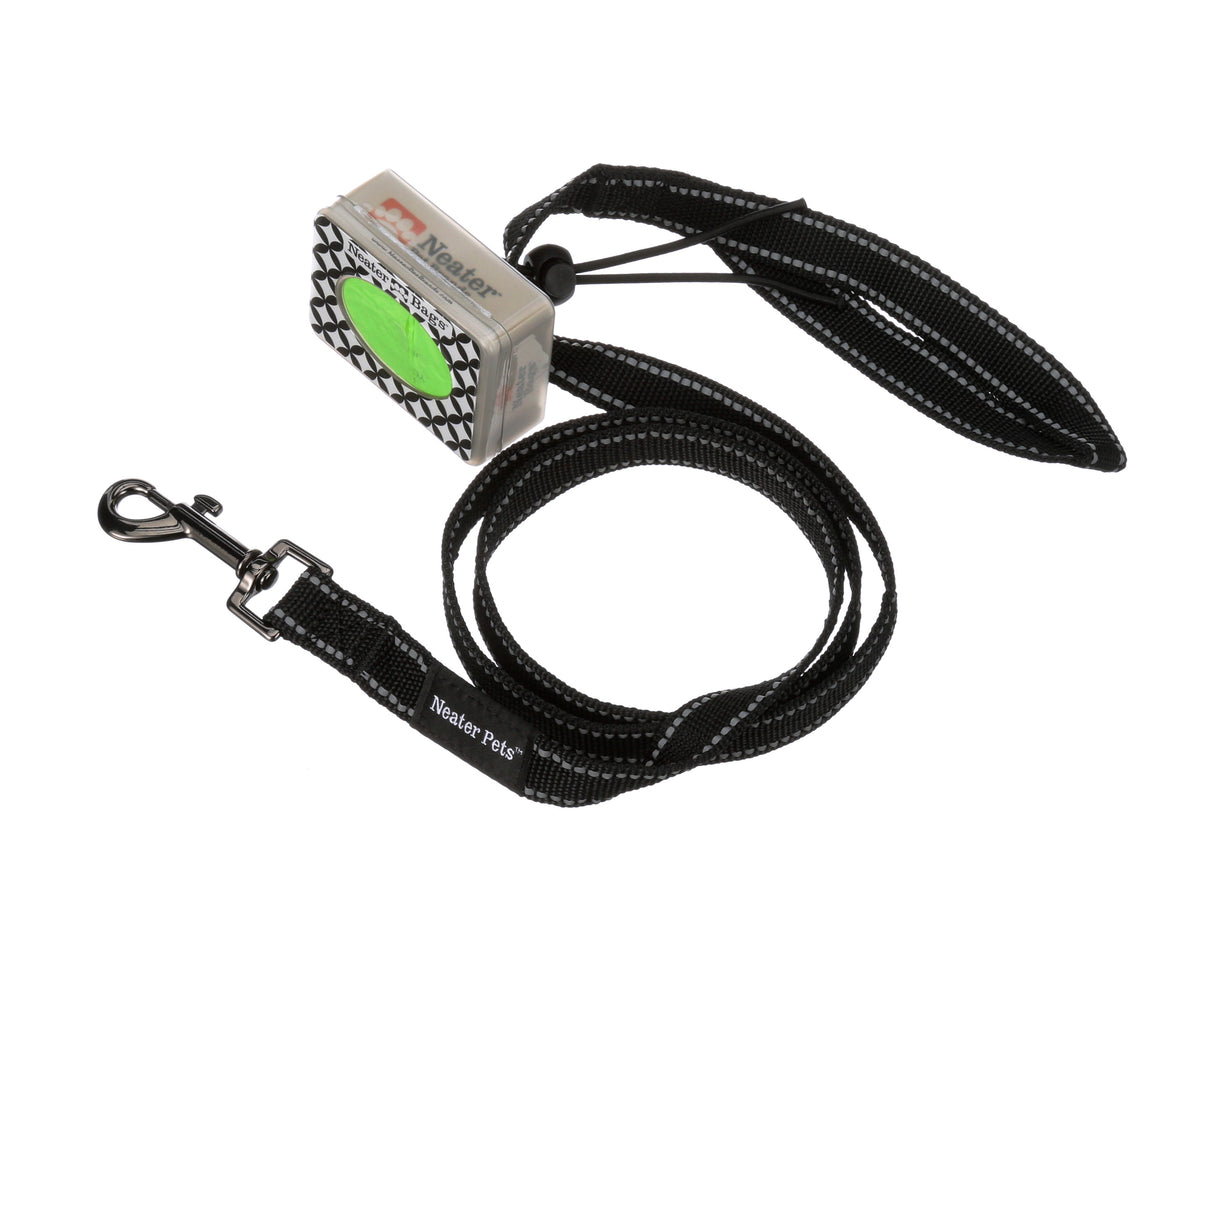 Reflective Leash with a Black and white Diamond Neater Bag Dispenser